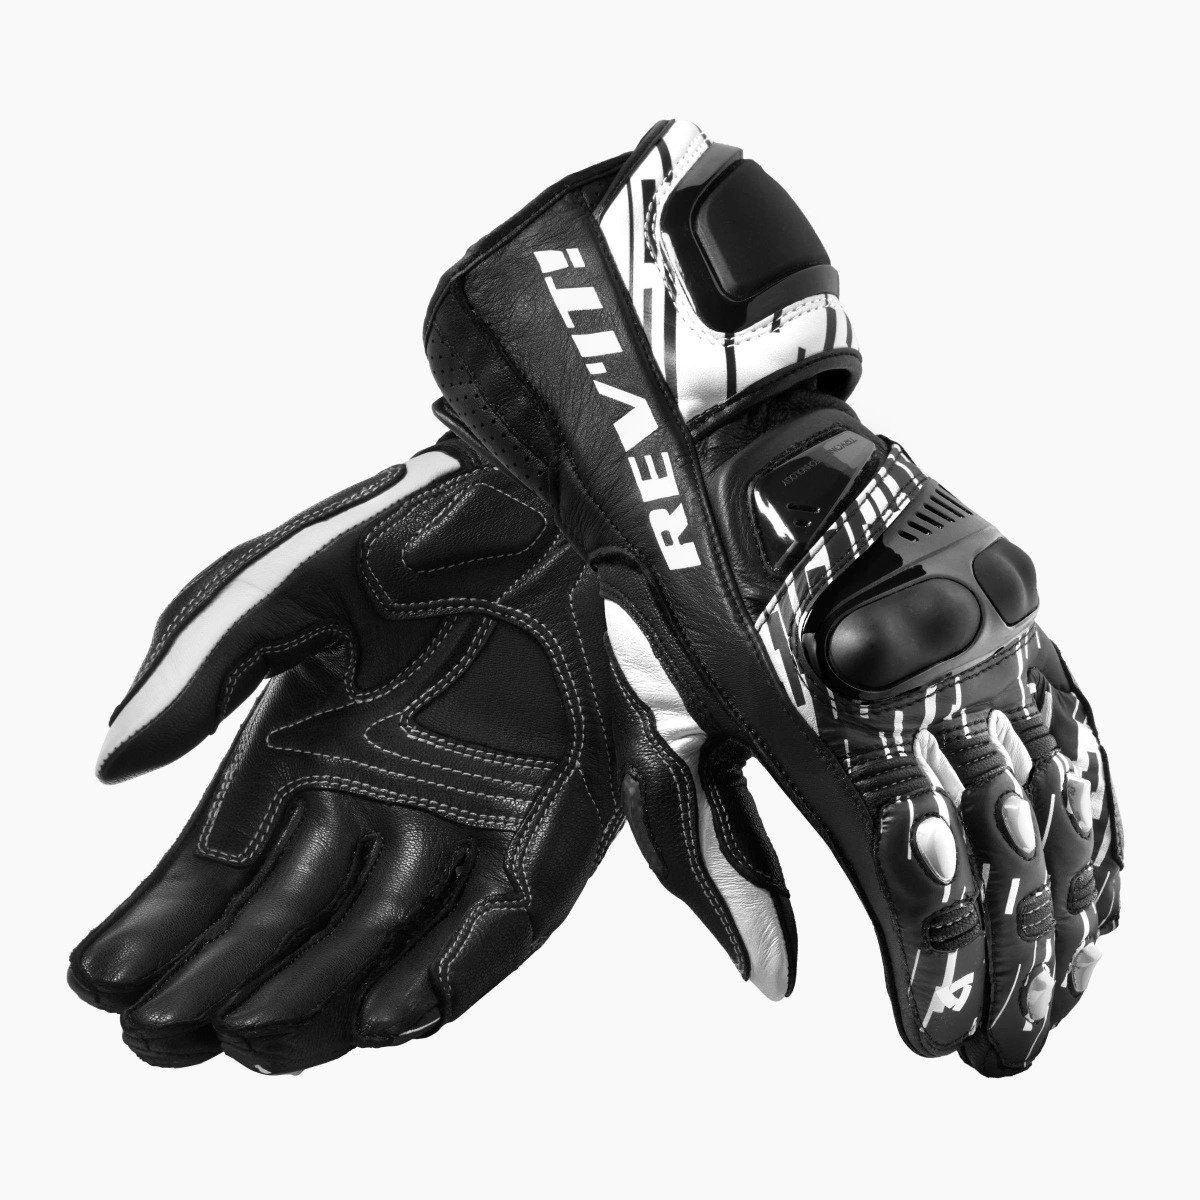 Image of REV'IT! Quantum 2 White Black Motorcycle Gloves Size XL ID 8700001308748